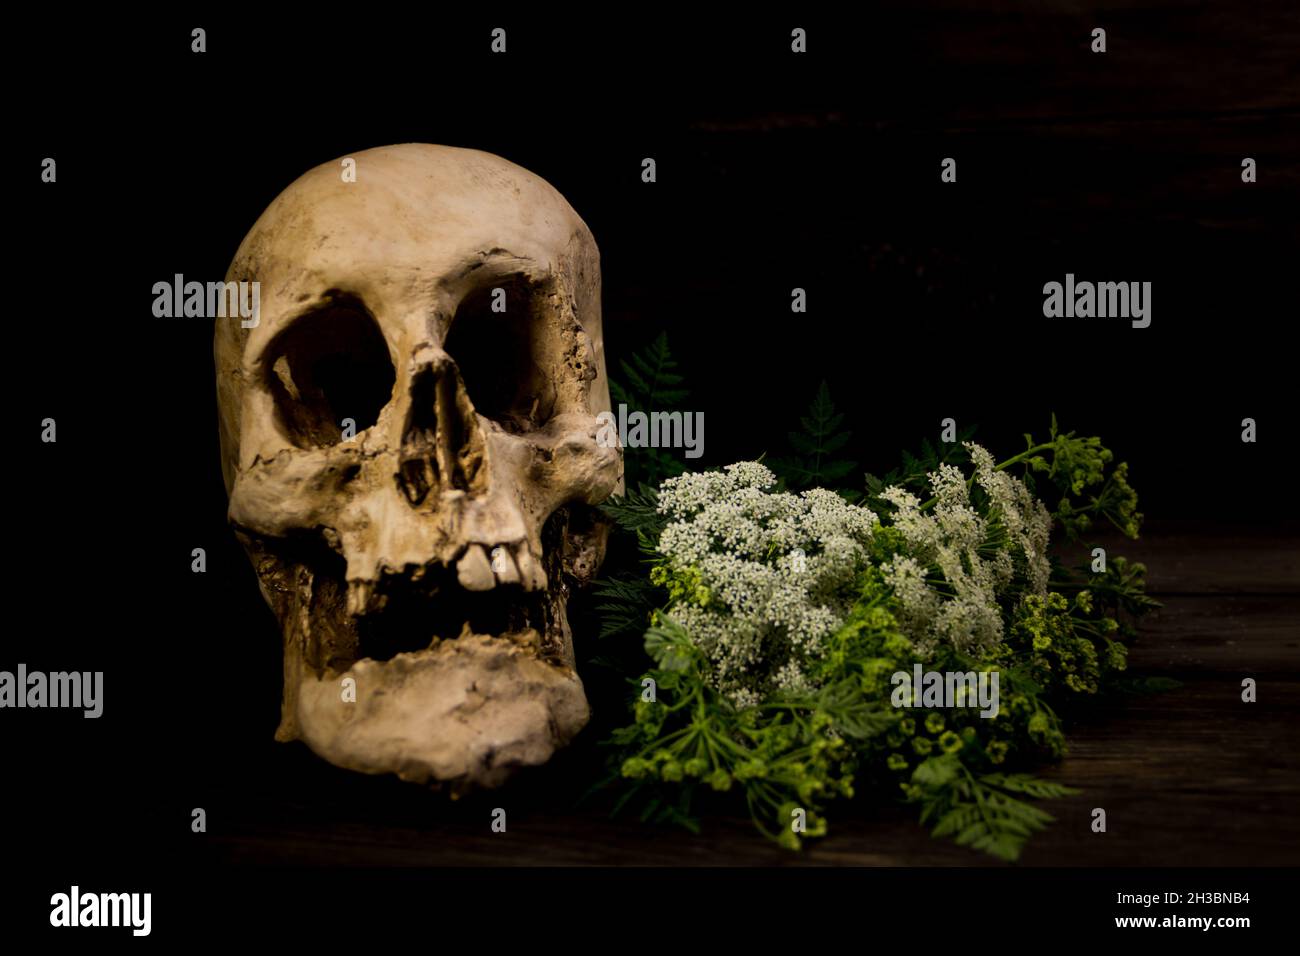 a bouquet of hemlock flowers with a human skull Stock Photo